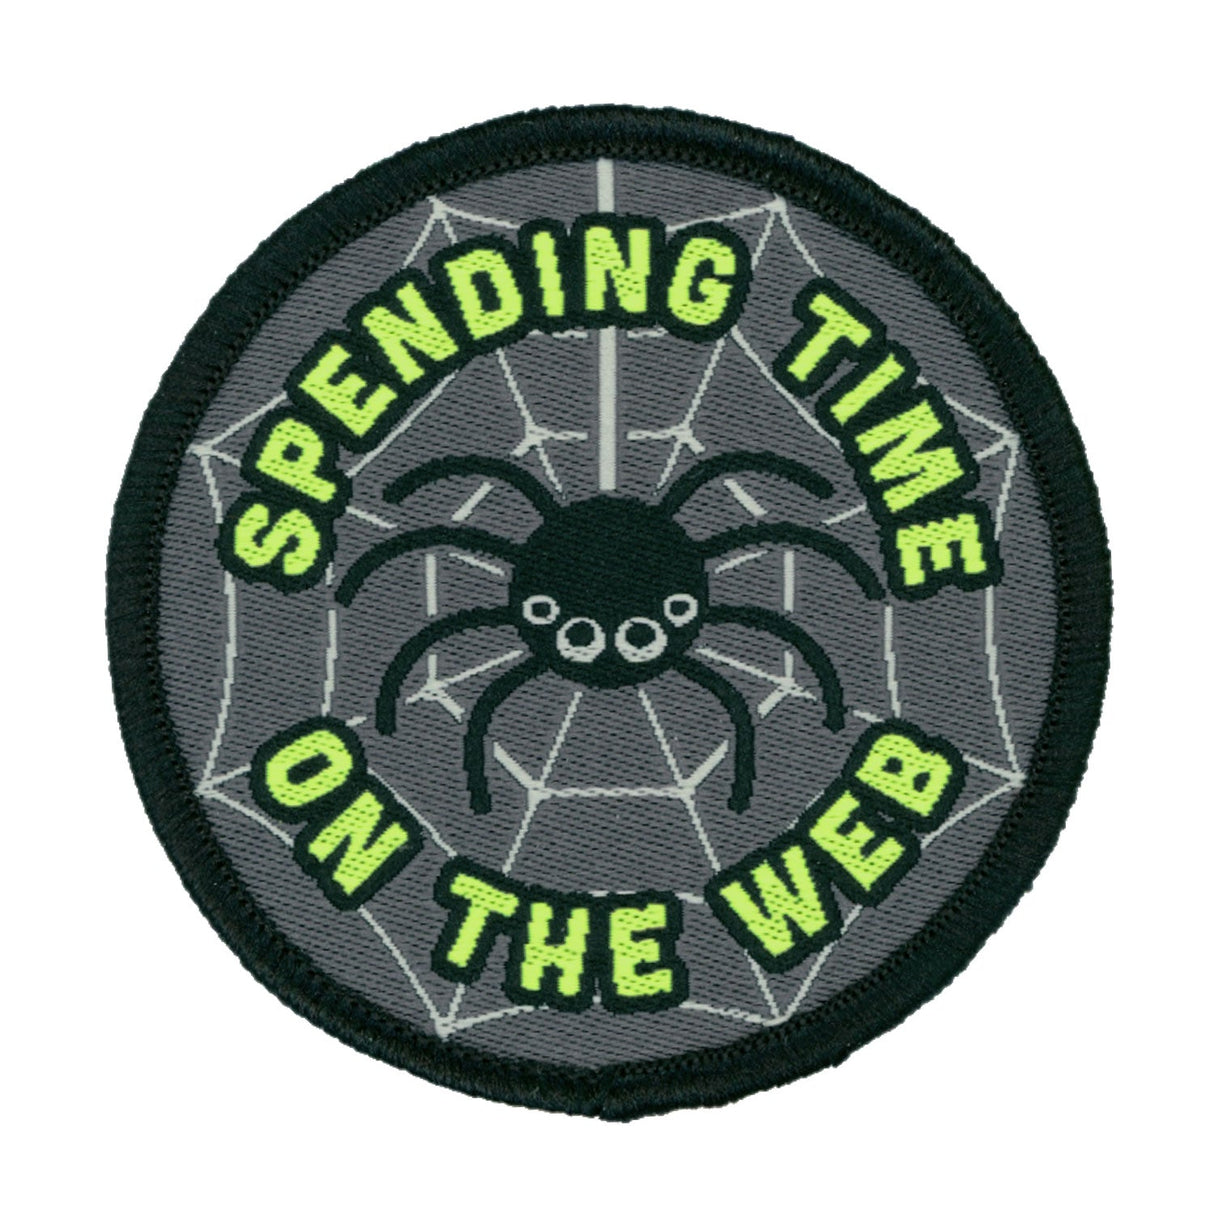 Spending Time on the Web Patch